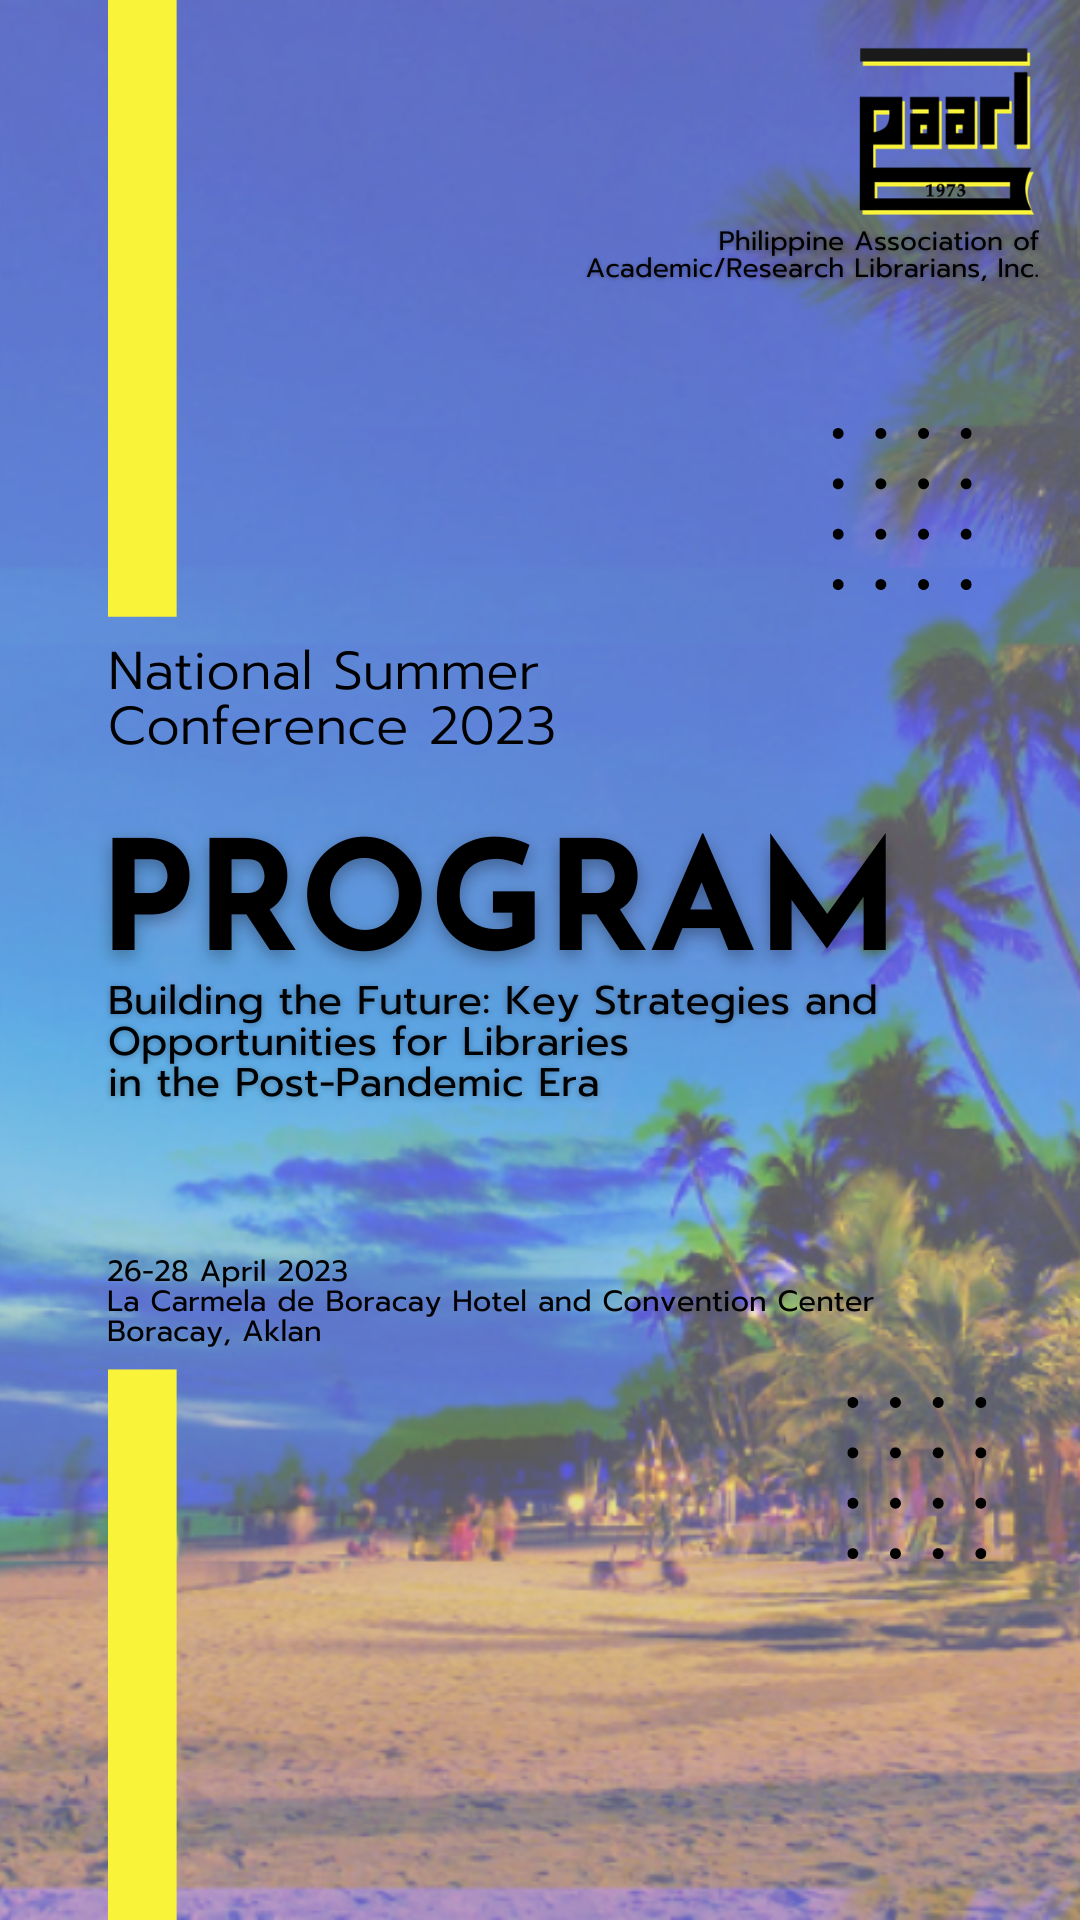 National Summer Conference 2023 Program is here